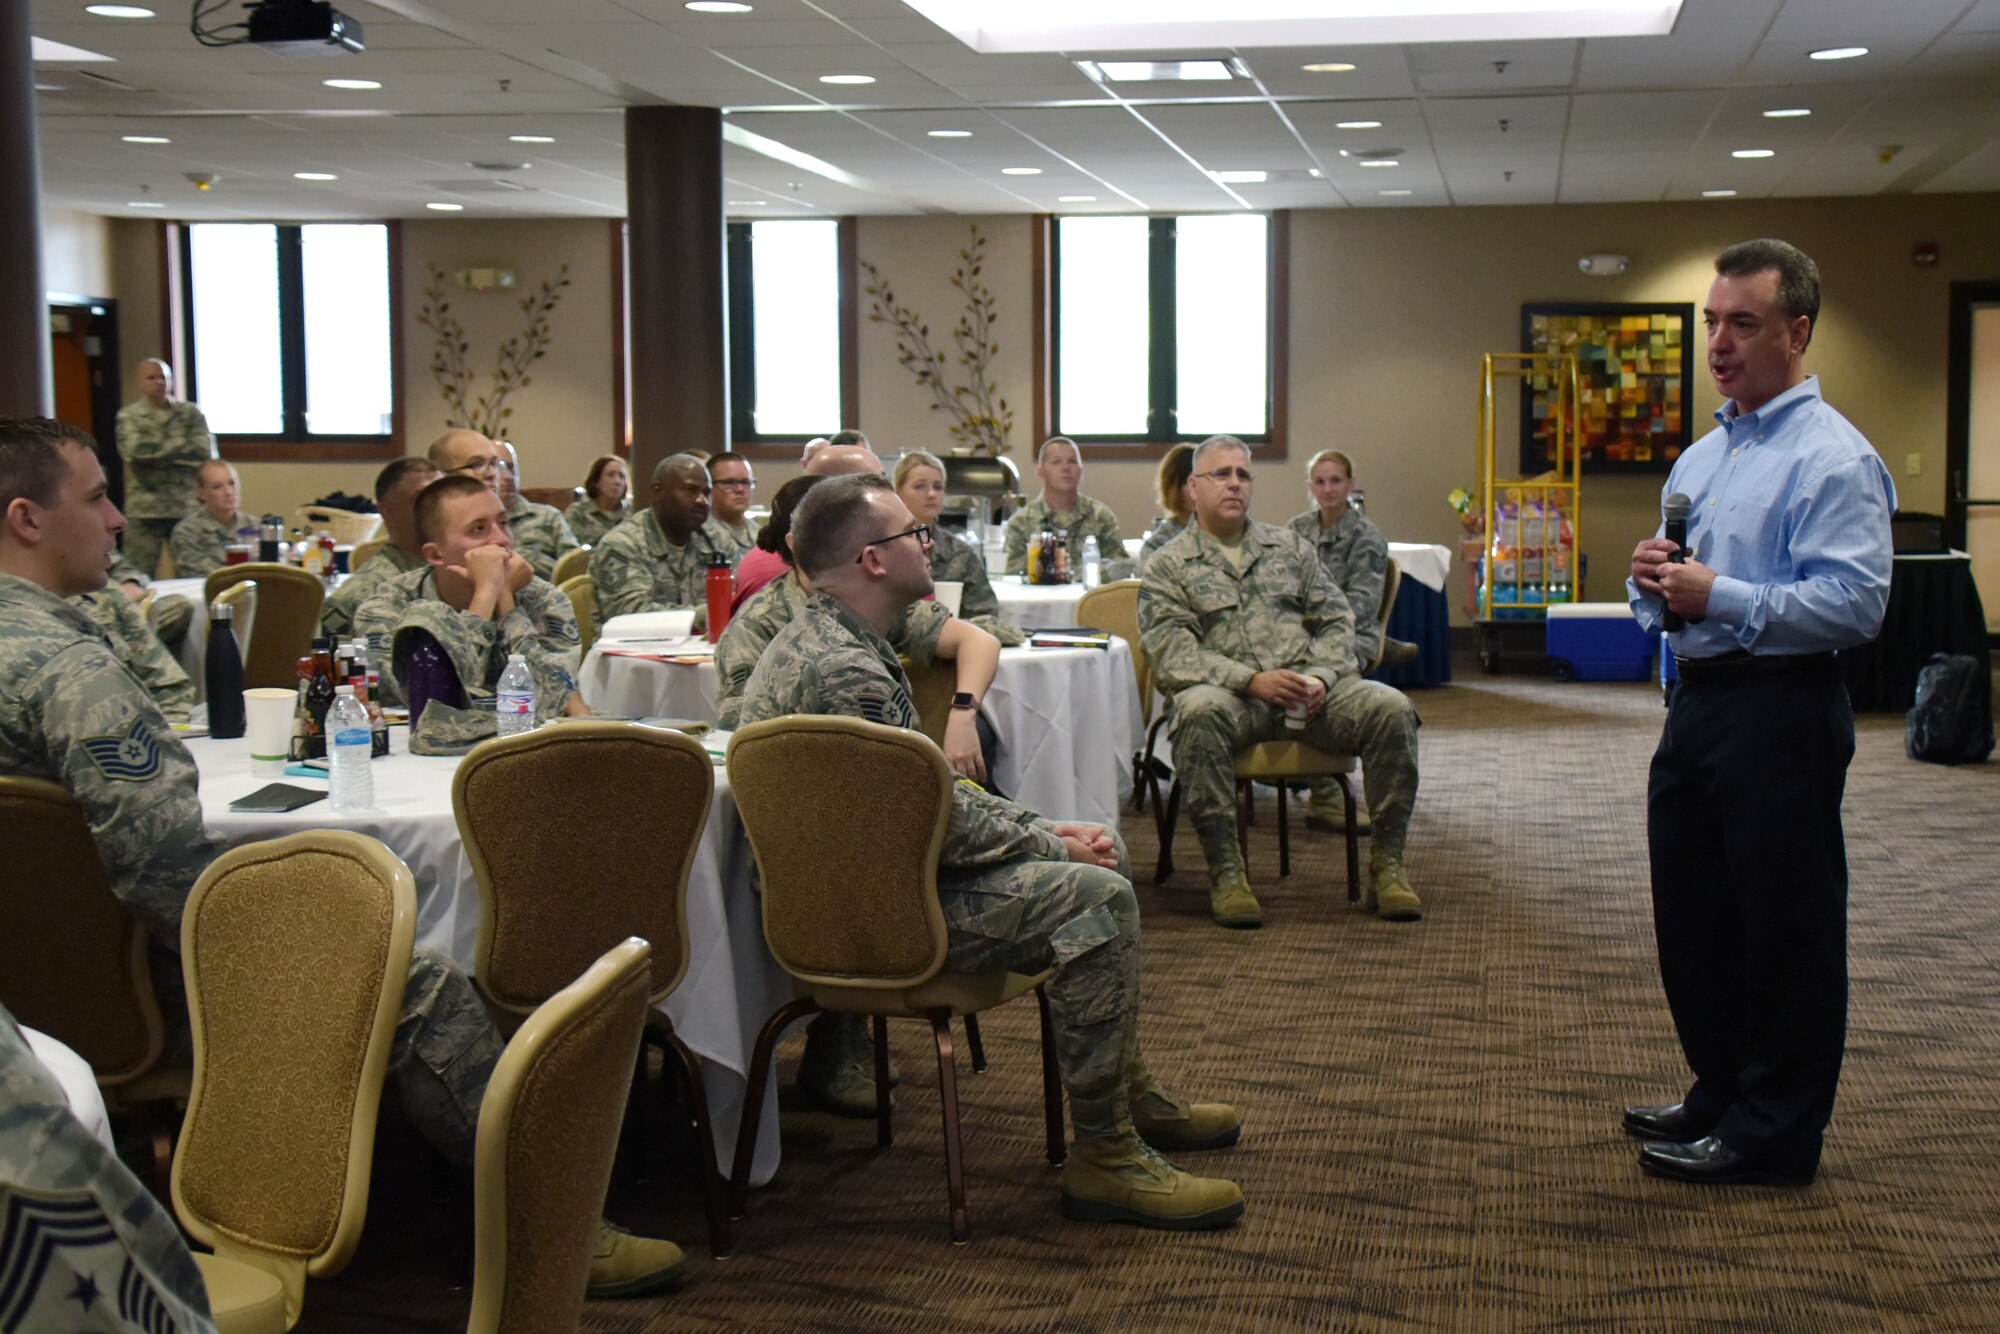 Dennis Flynn, the Commerce City, Colorado Police Department Commander, provides an impactful presentation about PTSD to Airmen during the Enlisted Leadership Symposium, Jul. 25, at Youngstown-Warren Air Reserve Station in Vienna, Ohio. Flynn brought a unique perspective to the table because he worked as a hostage negotiator for several years where he encountered veterans suffering from PTSD firsthand.